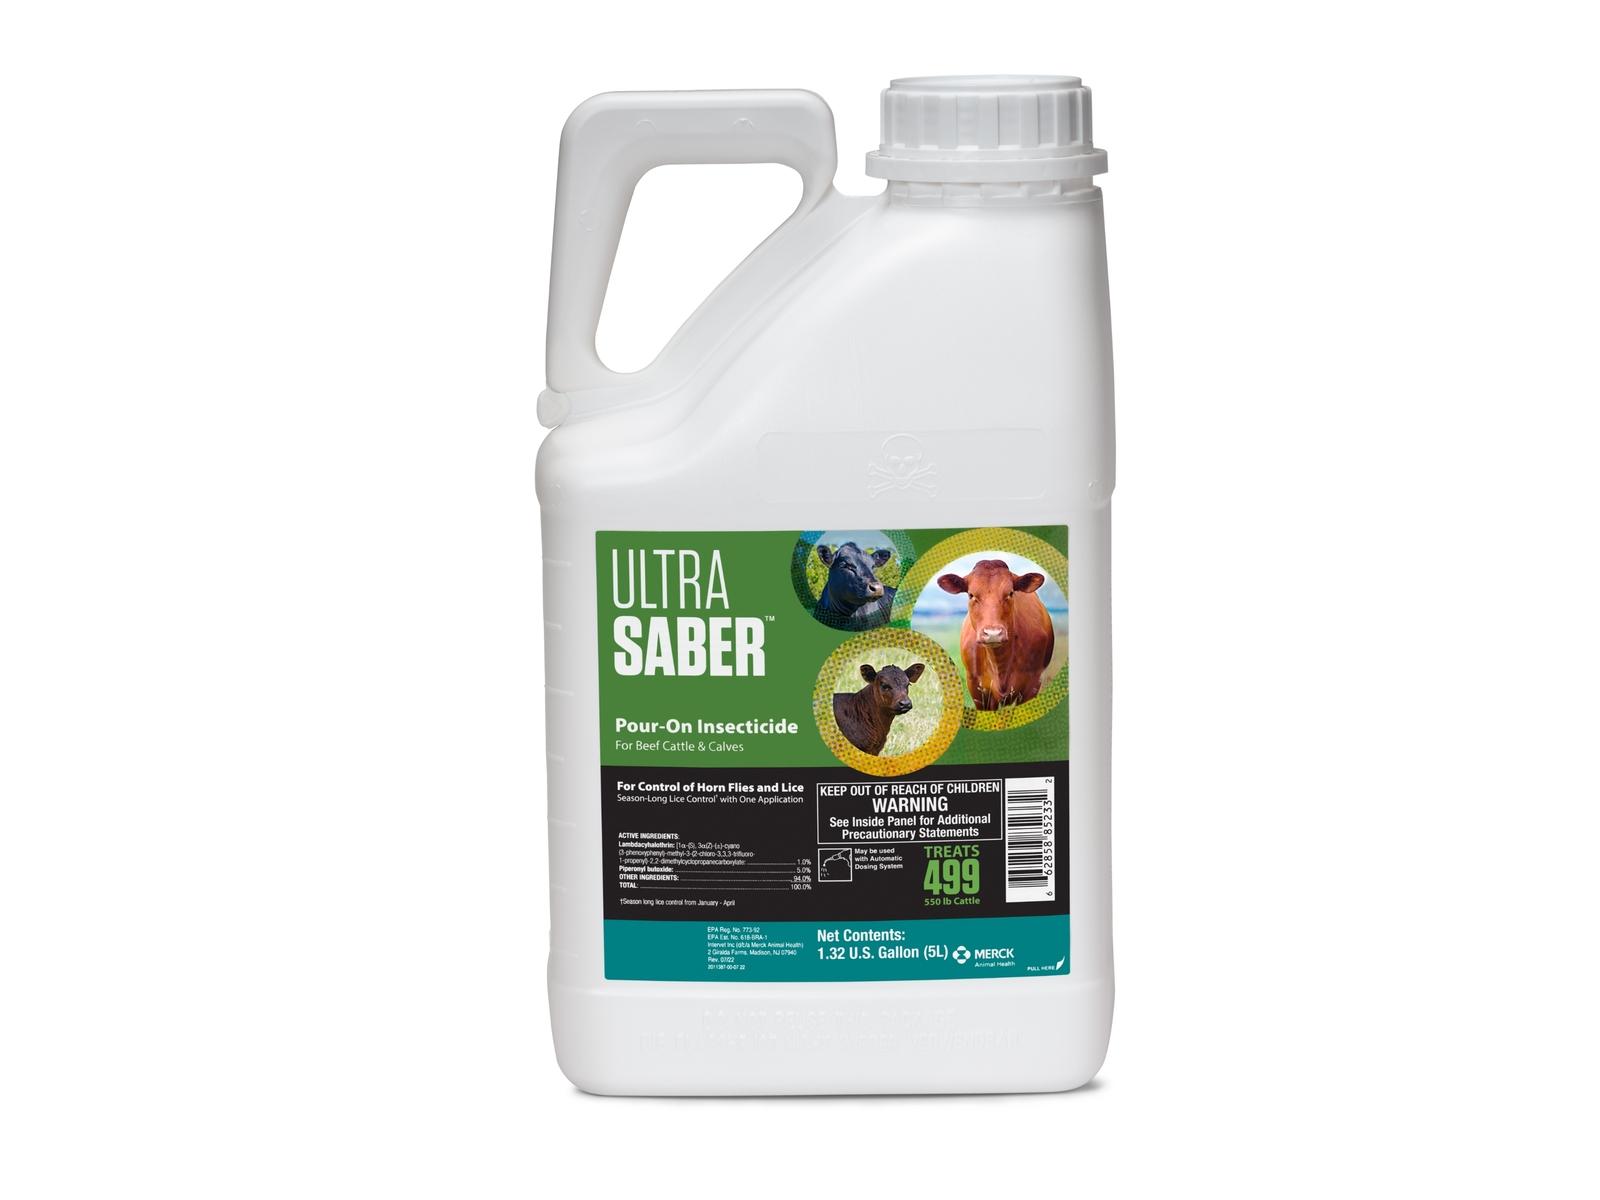 Merck Ultra Saber Pour-On insecticide